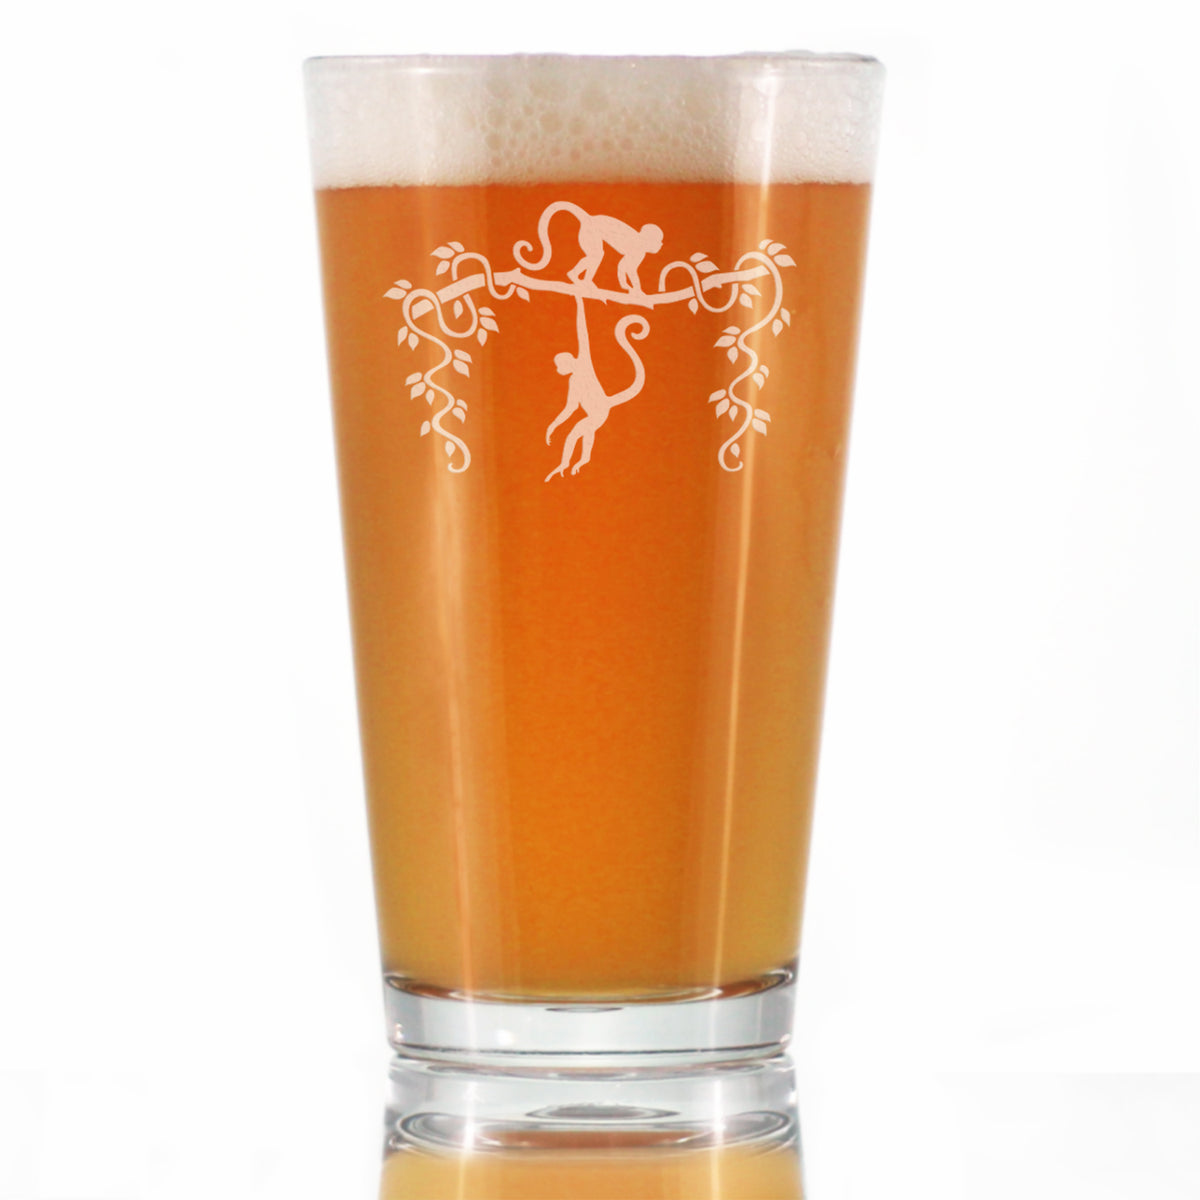 Monkey Pint Glass for Beer - Fun Wild Animal Themed Decor and Gifts for Lovers of Apes and Monkeys - 16 Oz Glasses